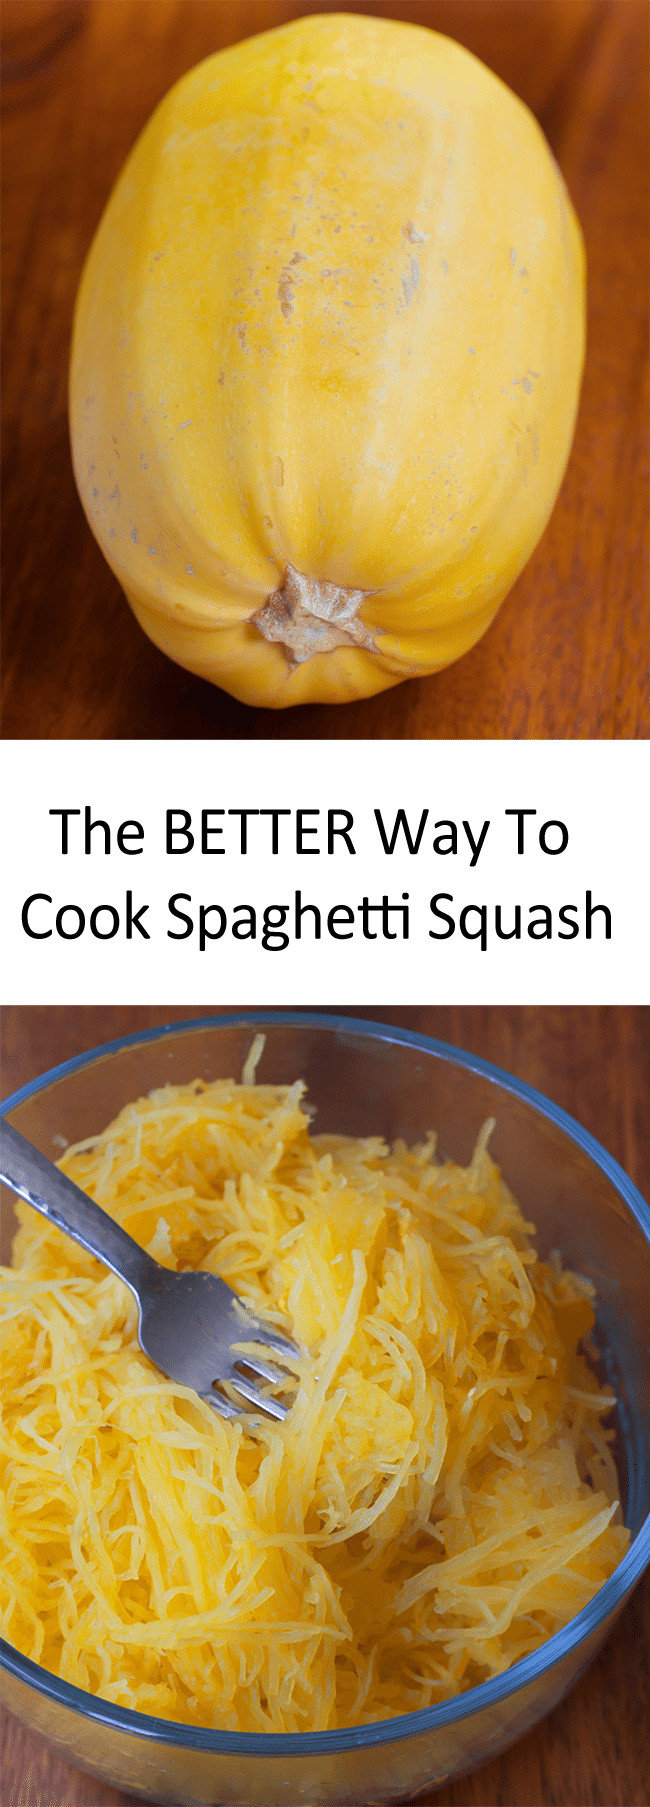 Cooking Spaghetti In Microwave
 How To Cook Spaghetti Squash